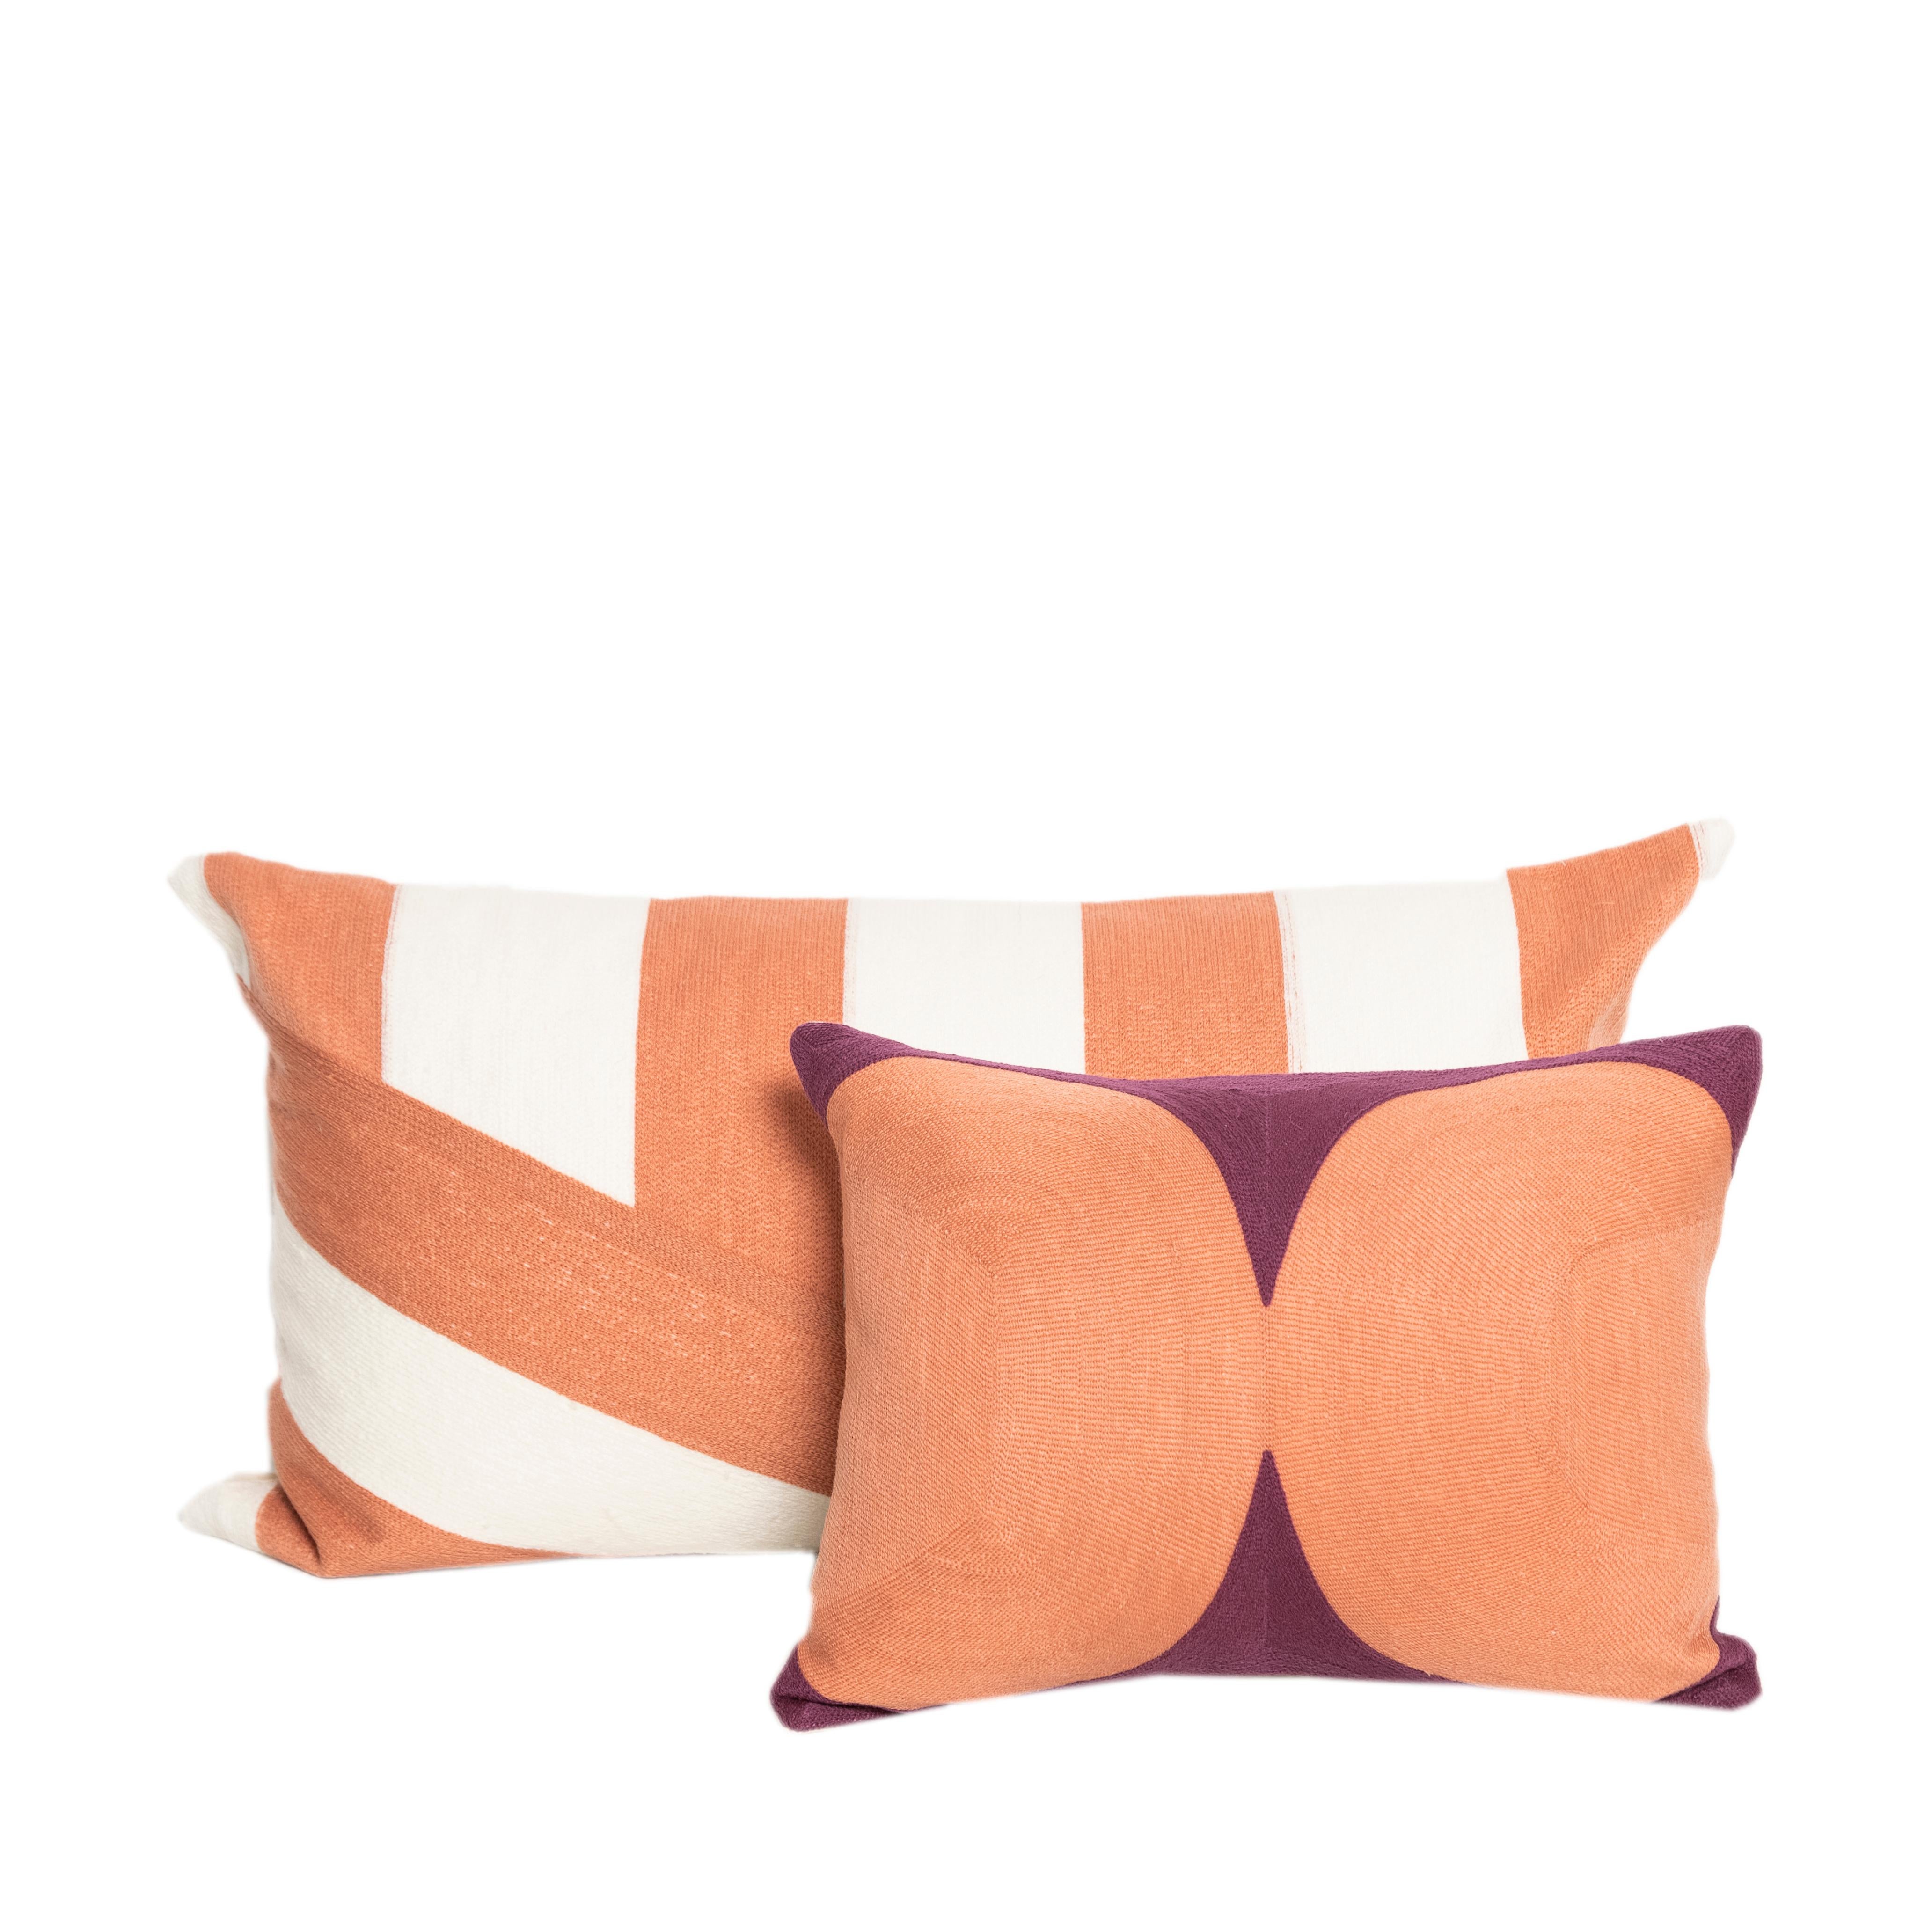 Indian Contemporary Modern Kilombo Home Embroidery Pillow Cushion Cotton Pulple Salmon For Sale